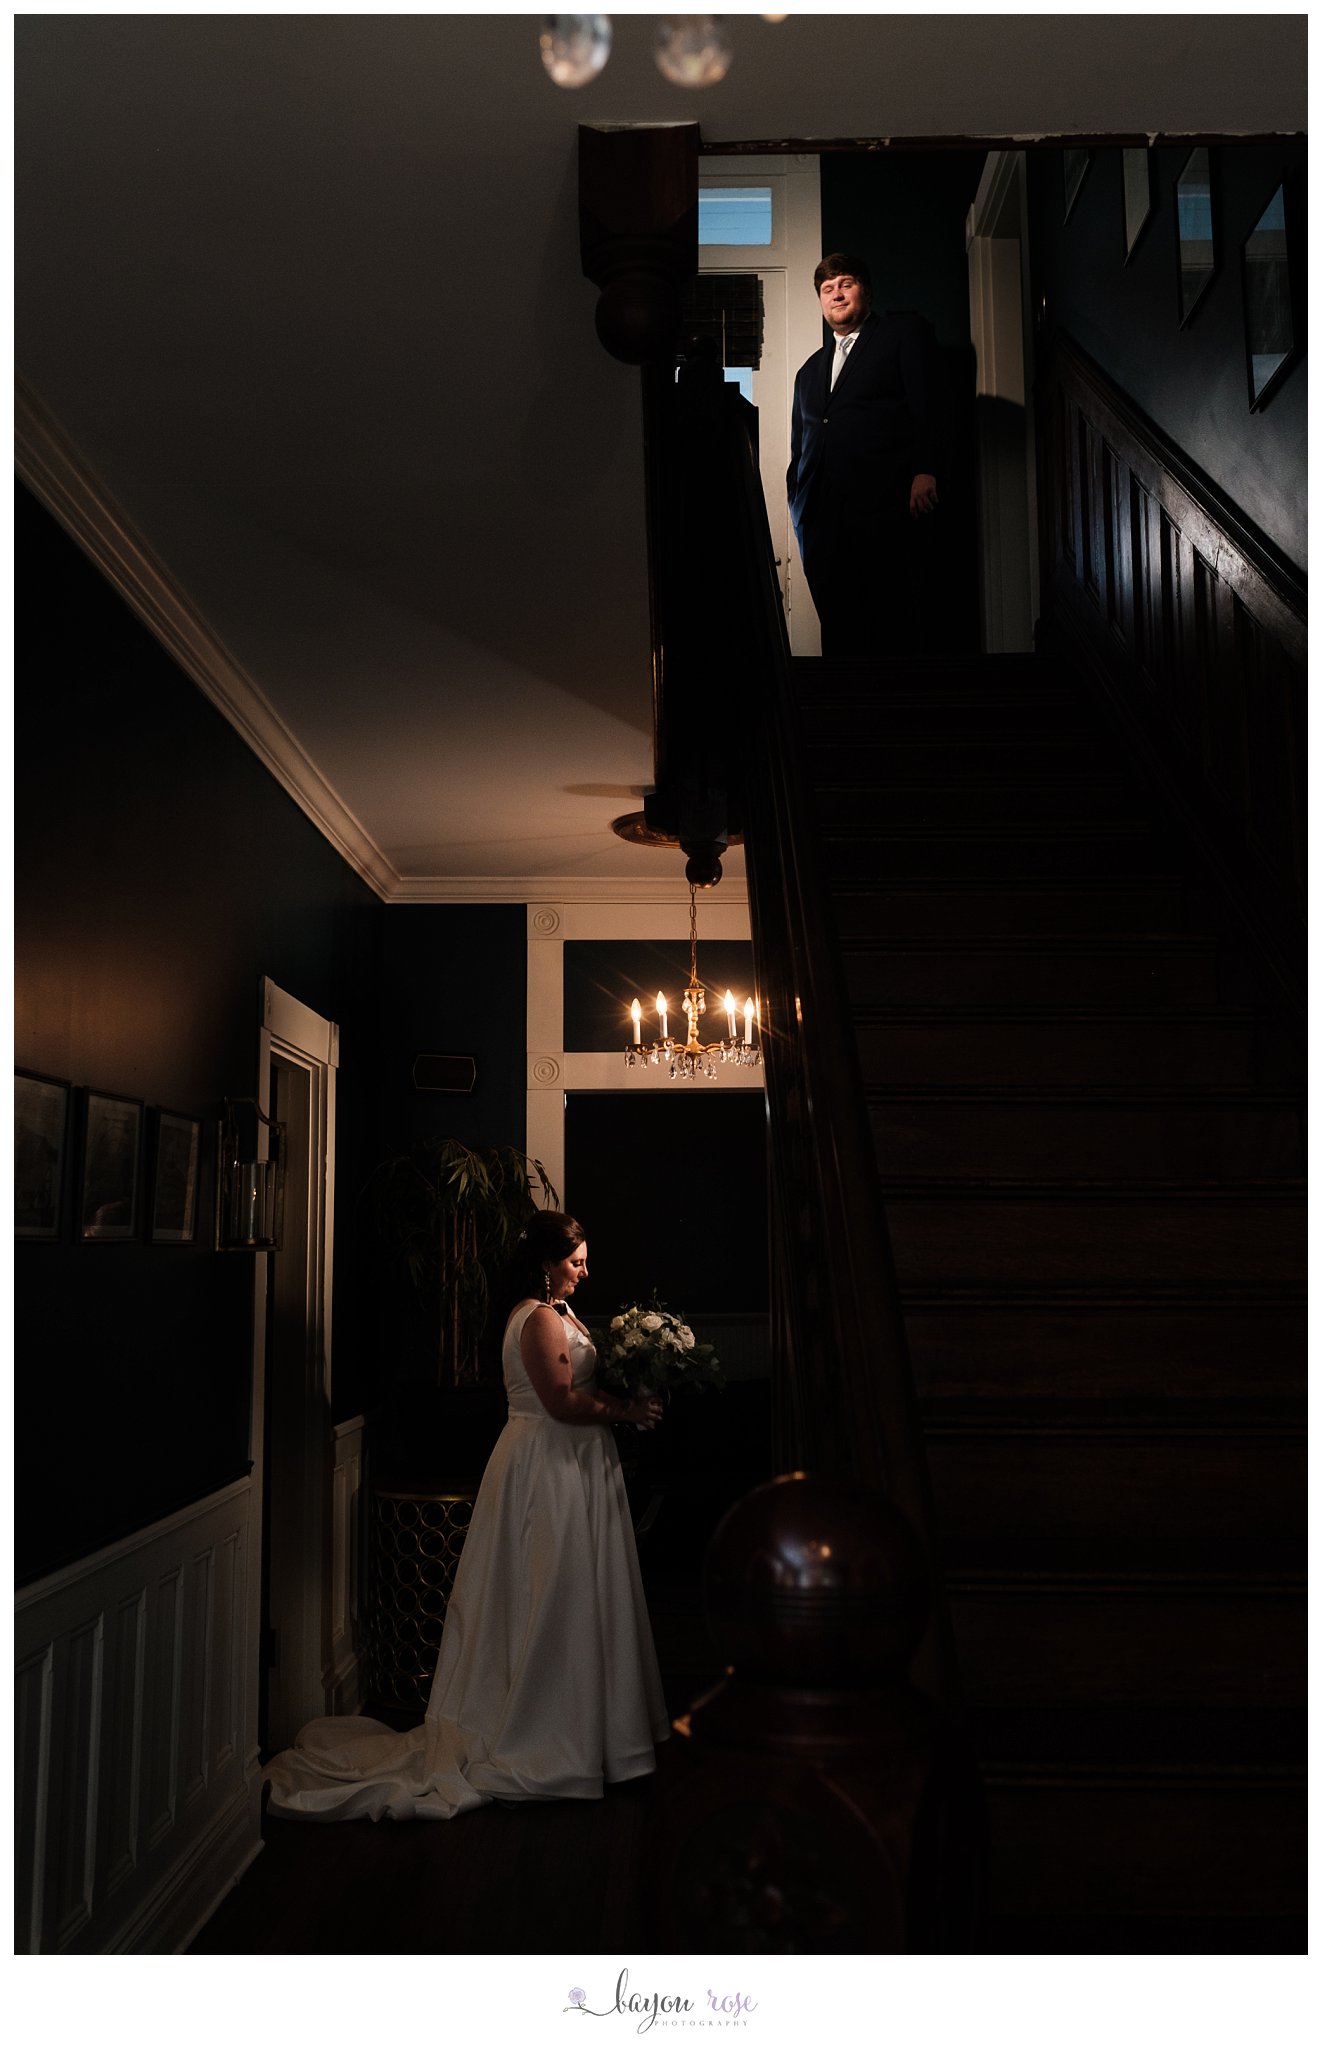 artistic bride and groom photo on staircase